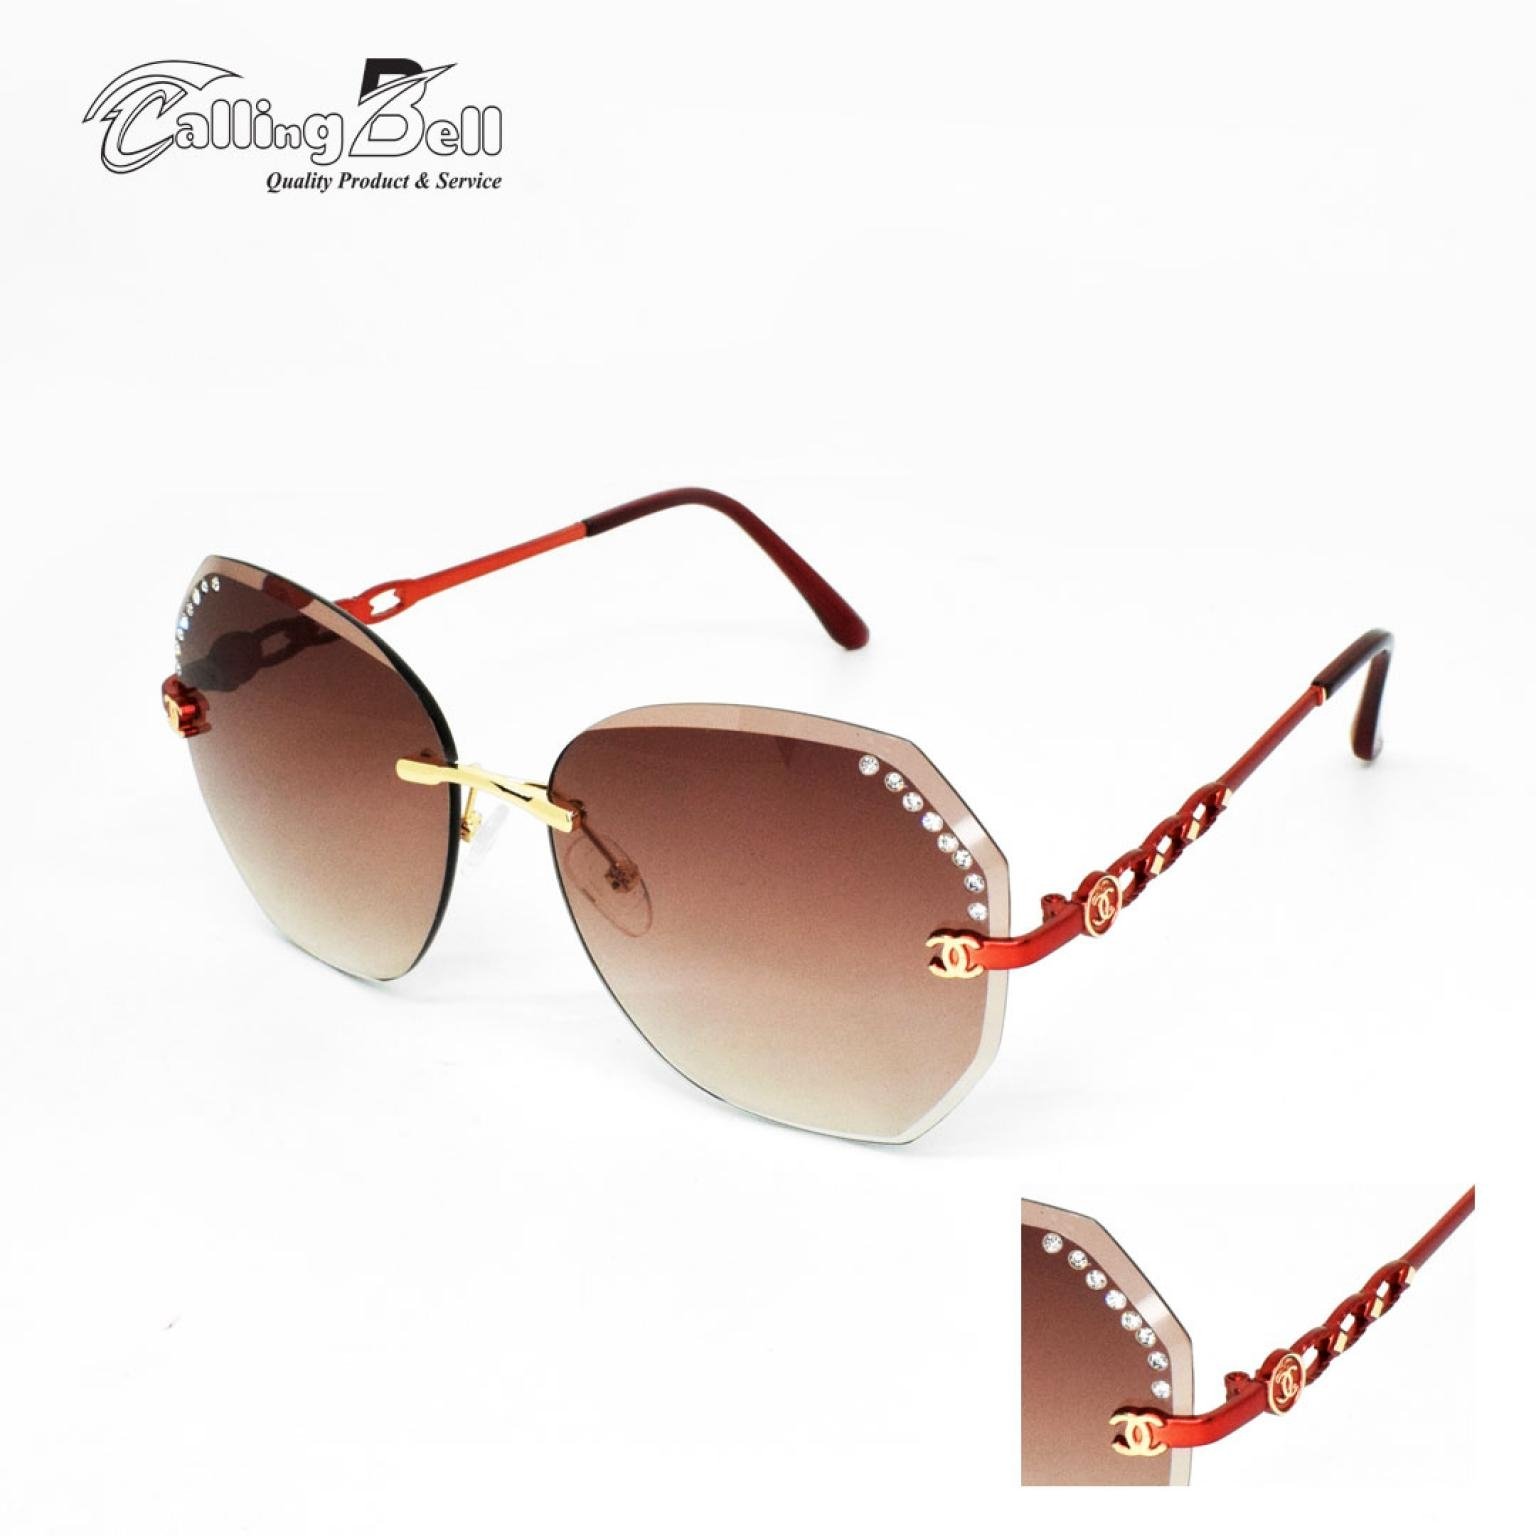 FASHIONABLE MOST TRENDY SUNGLASS BROWN PURPLE LENS WITH GOLDEN FRAME FOR WOMEN STONE PUTTING